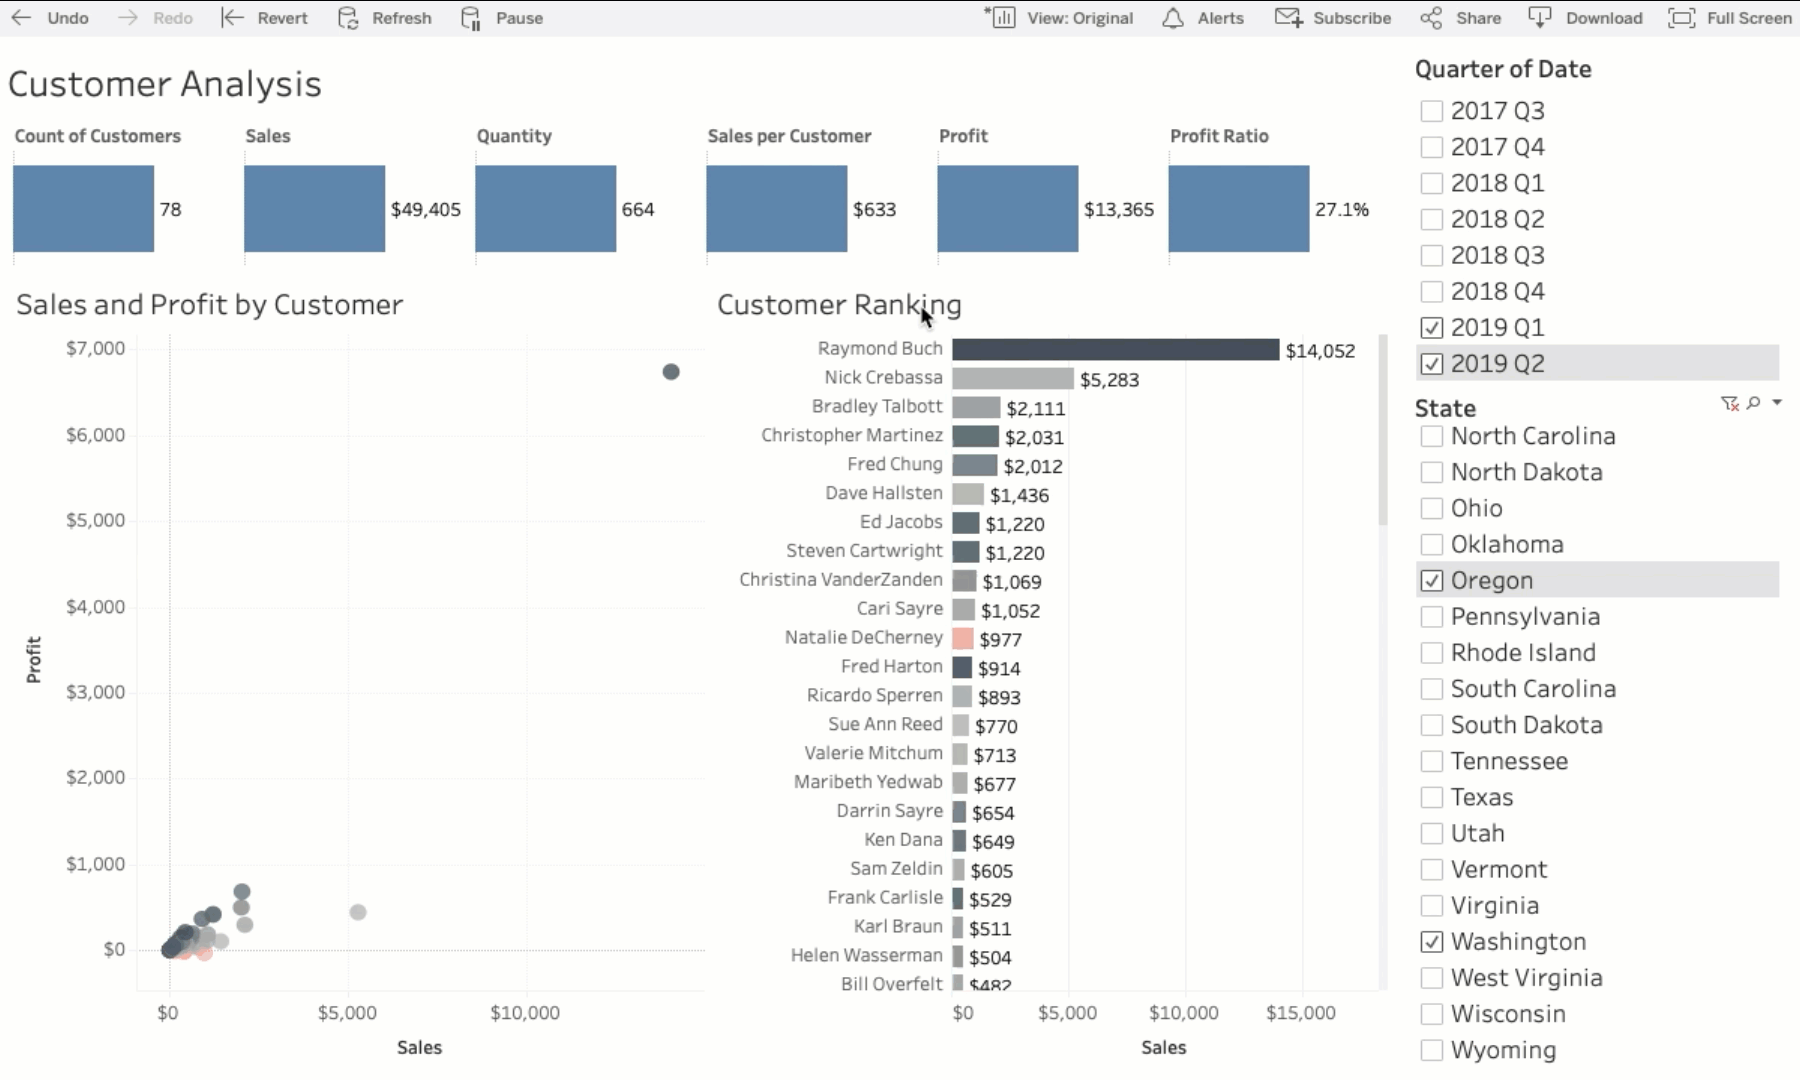 GIF showing how to create a Custom View in Tableau